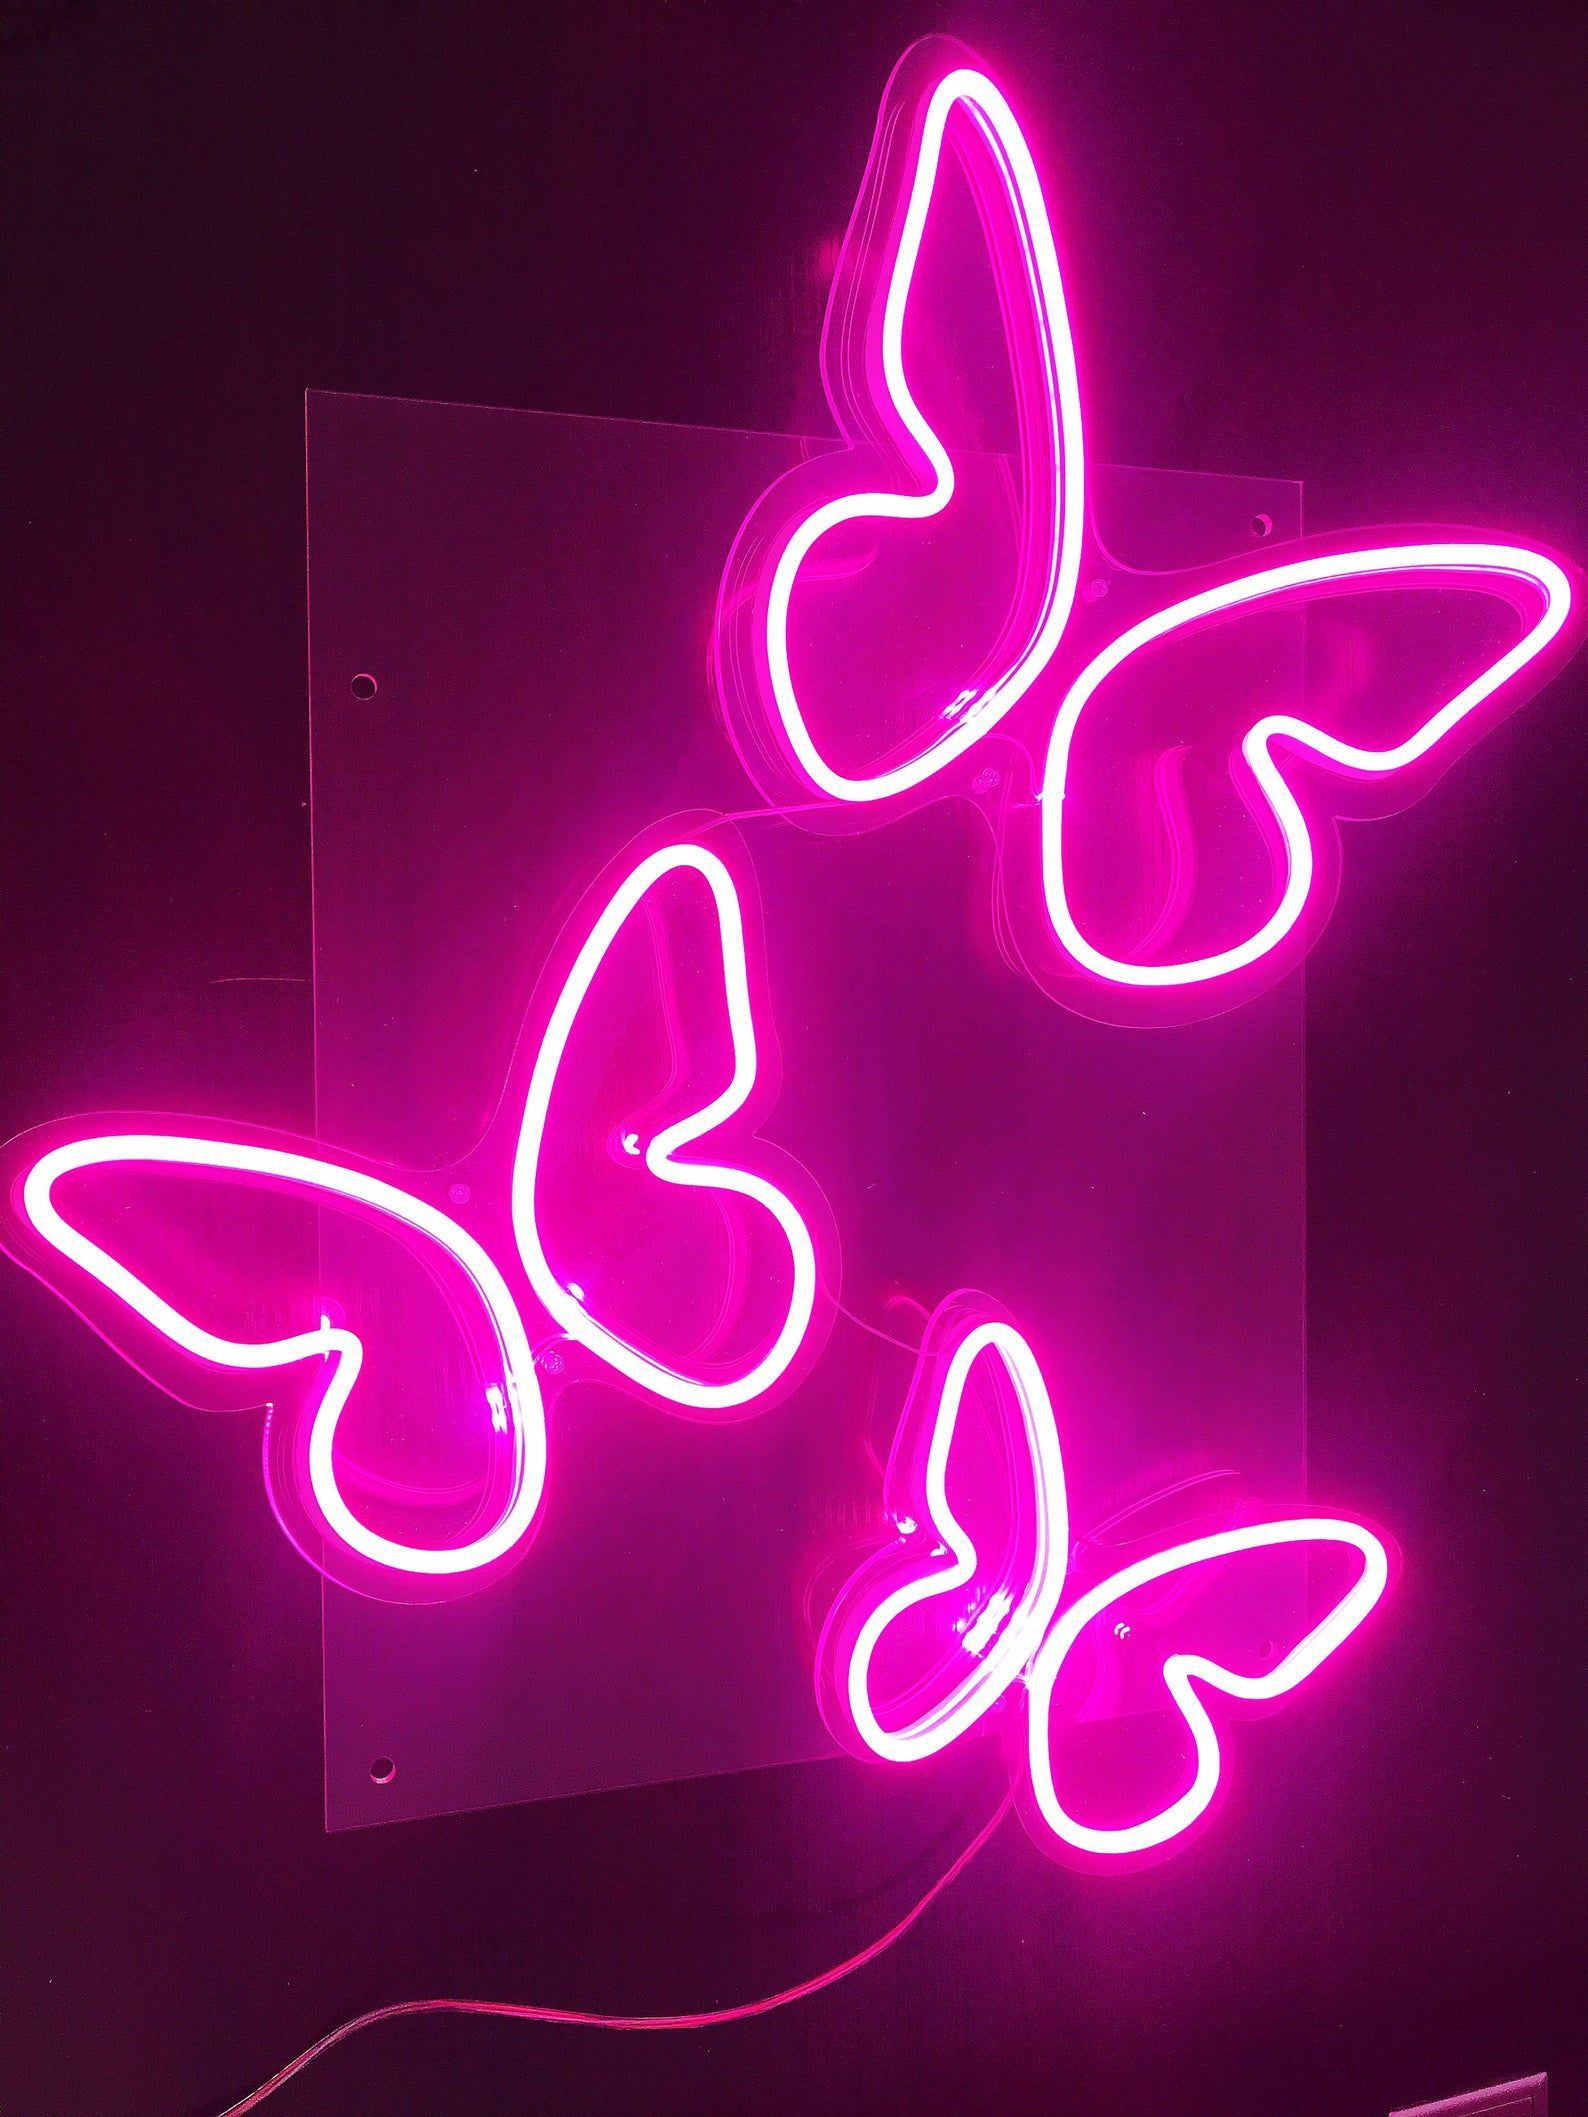 A neon light display of butterflies on the wall - Neon, neon pink, hot pink